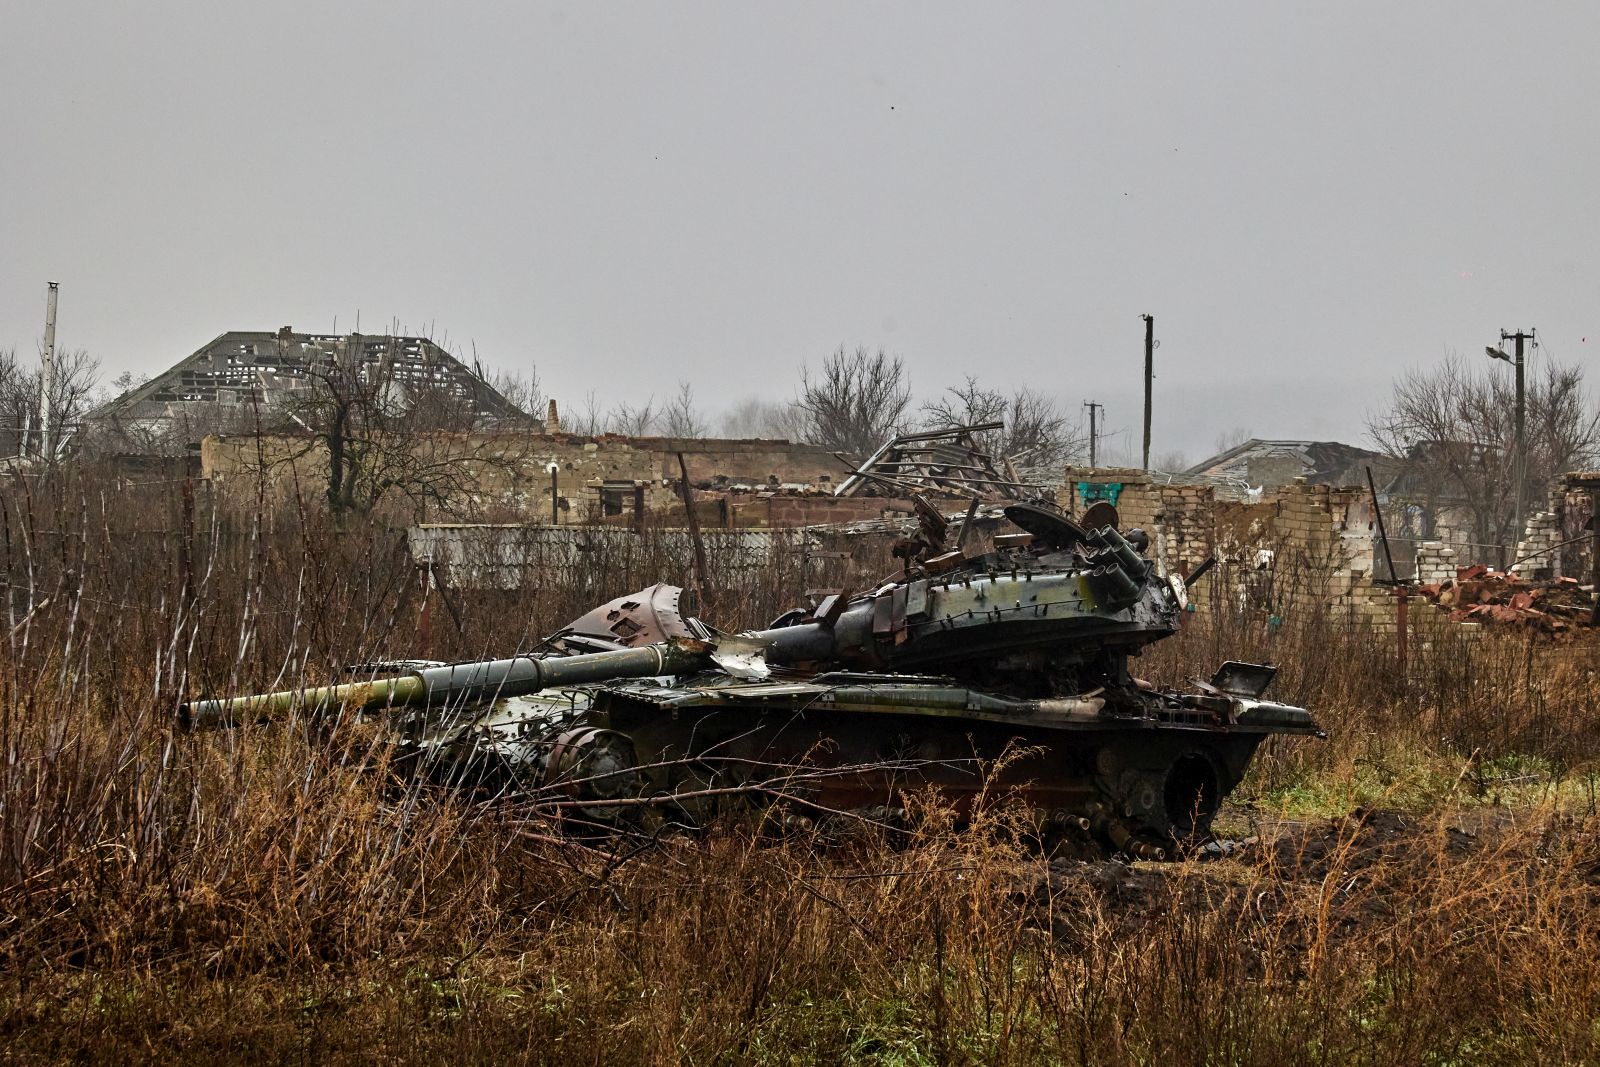 epa10363870 A destroyed tank in the village of Kam'yanka, near Izium, Kharkiv region, Ukraine, 13 December 2022, amid Russia's military invasion. Kharkiv and surrounding areas have been the target of heavy shelling since February 2022, when Russian troops entered Ukraine starting a conflict that has provoked destruction and a humanitarian crisis. At the beginning of September, the Ukrainian army pushed Russian forces from occupied territory northeast of the country in counterattacks.  EPA/SERGIY KOZLOV